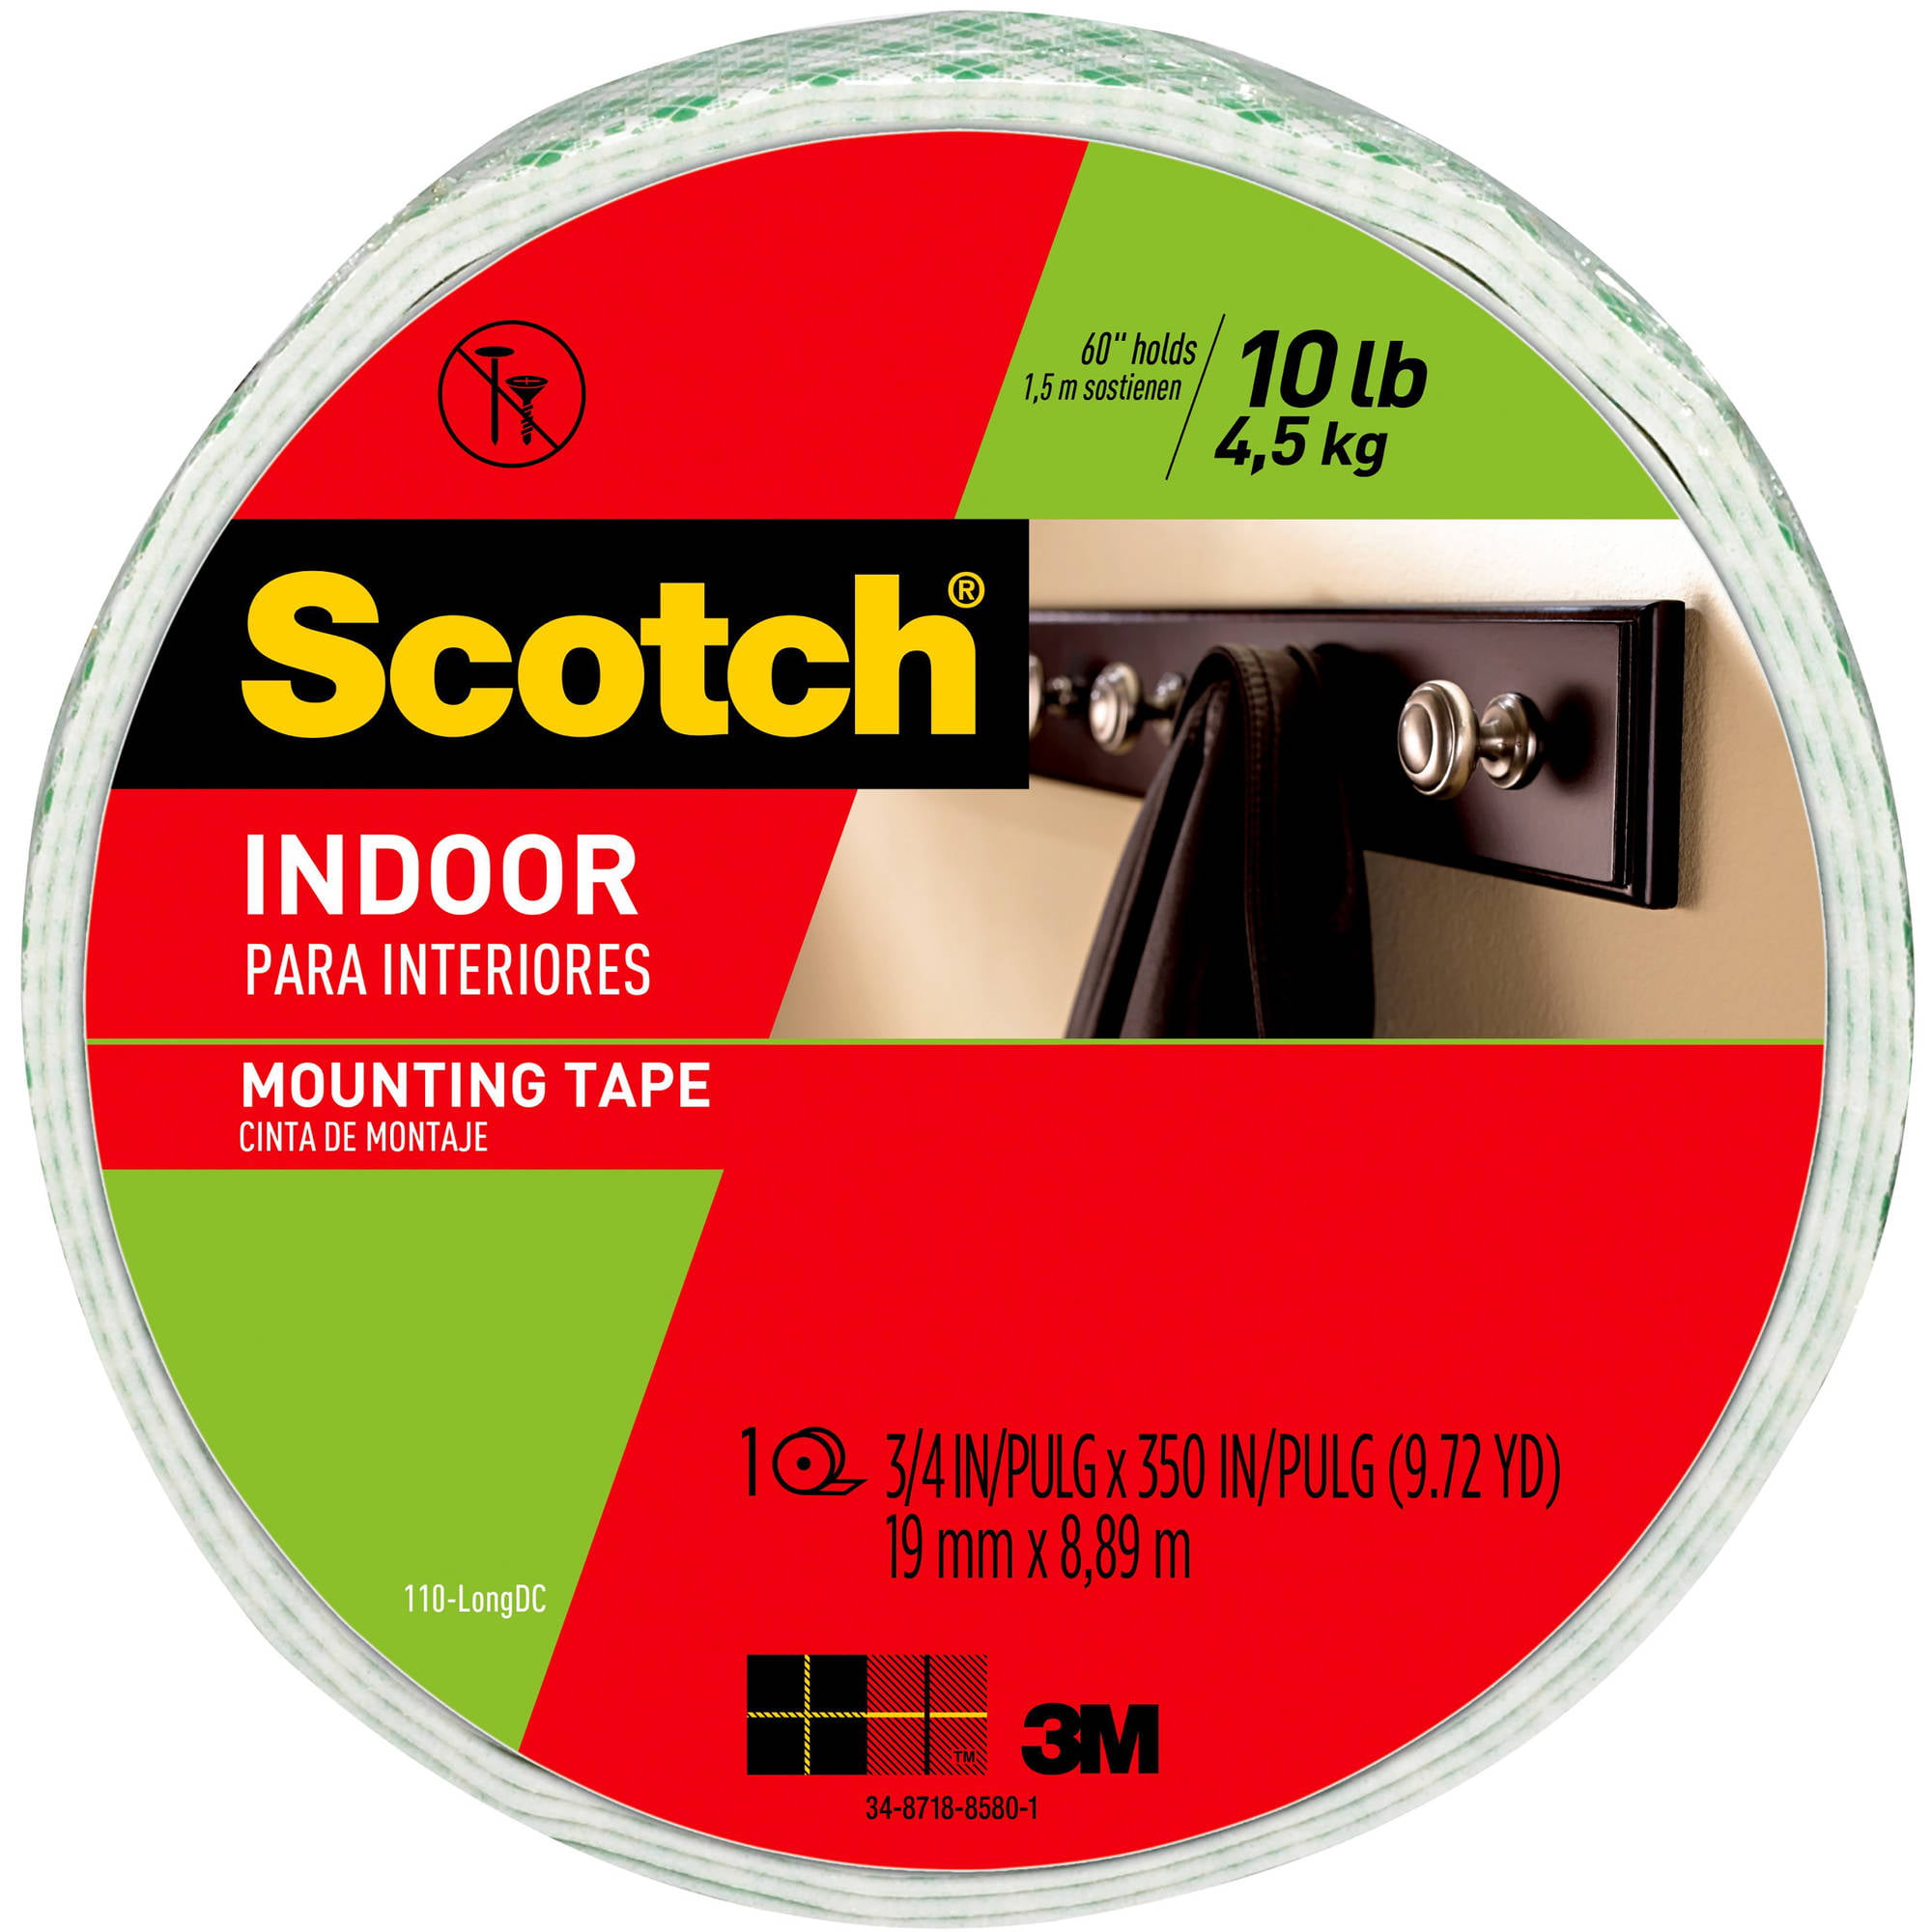 Scotch-Mount Indoor Double-Sided Mounting Tape Mega Roll 3/4 in x 350 in 